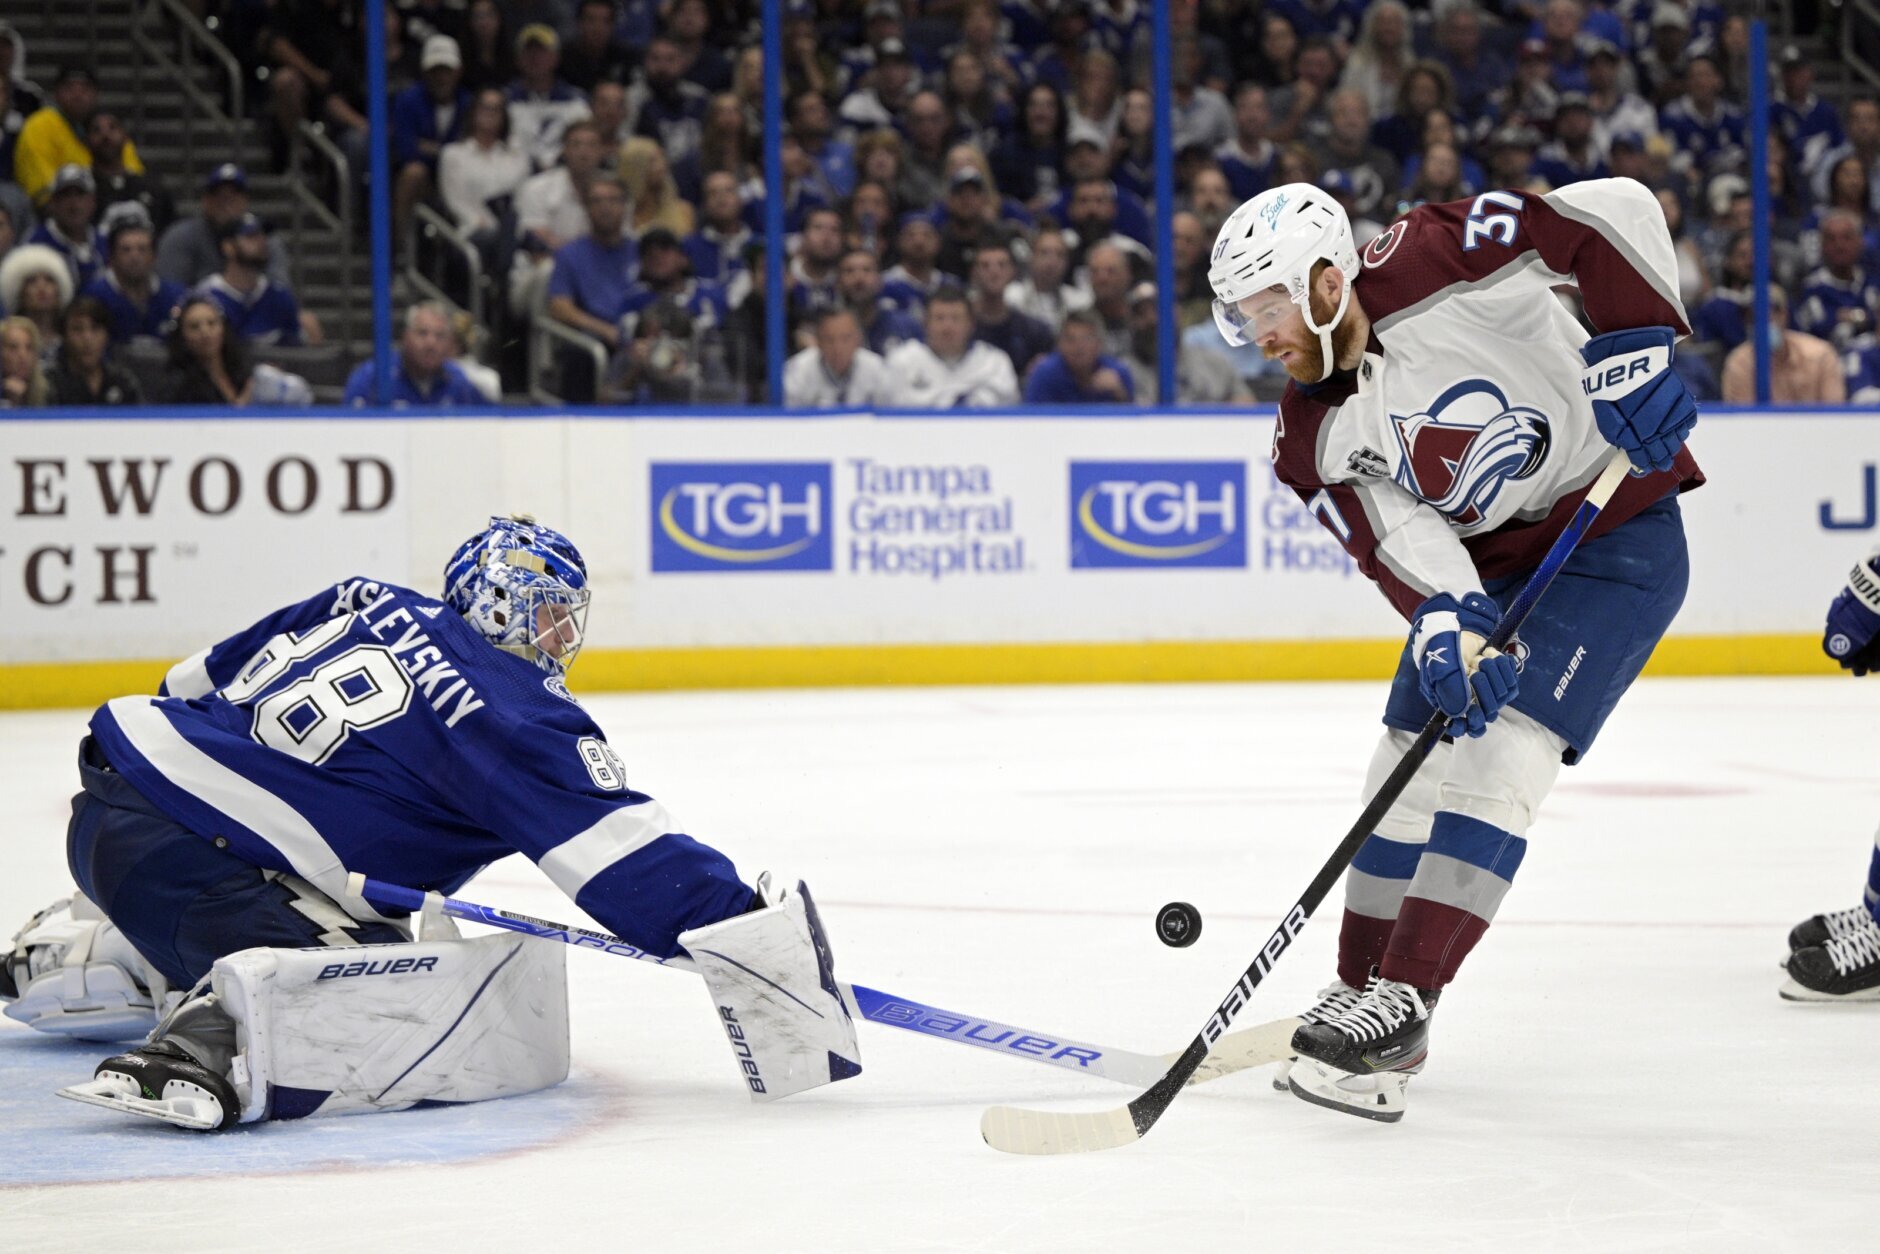 https://wtop.com/wp-content/uploads/2022/06/Stanley_Cup_Avalanche_Lightning_Hockey_79910-1880x1254.jpg